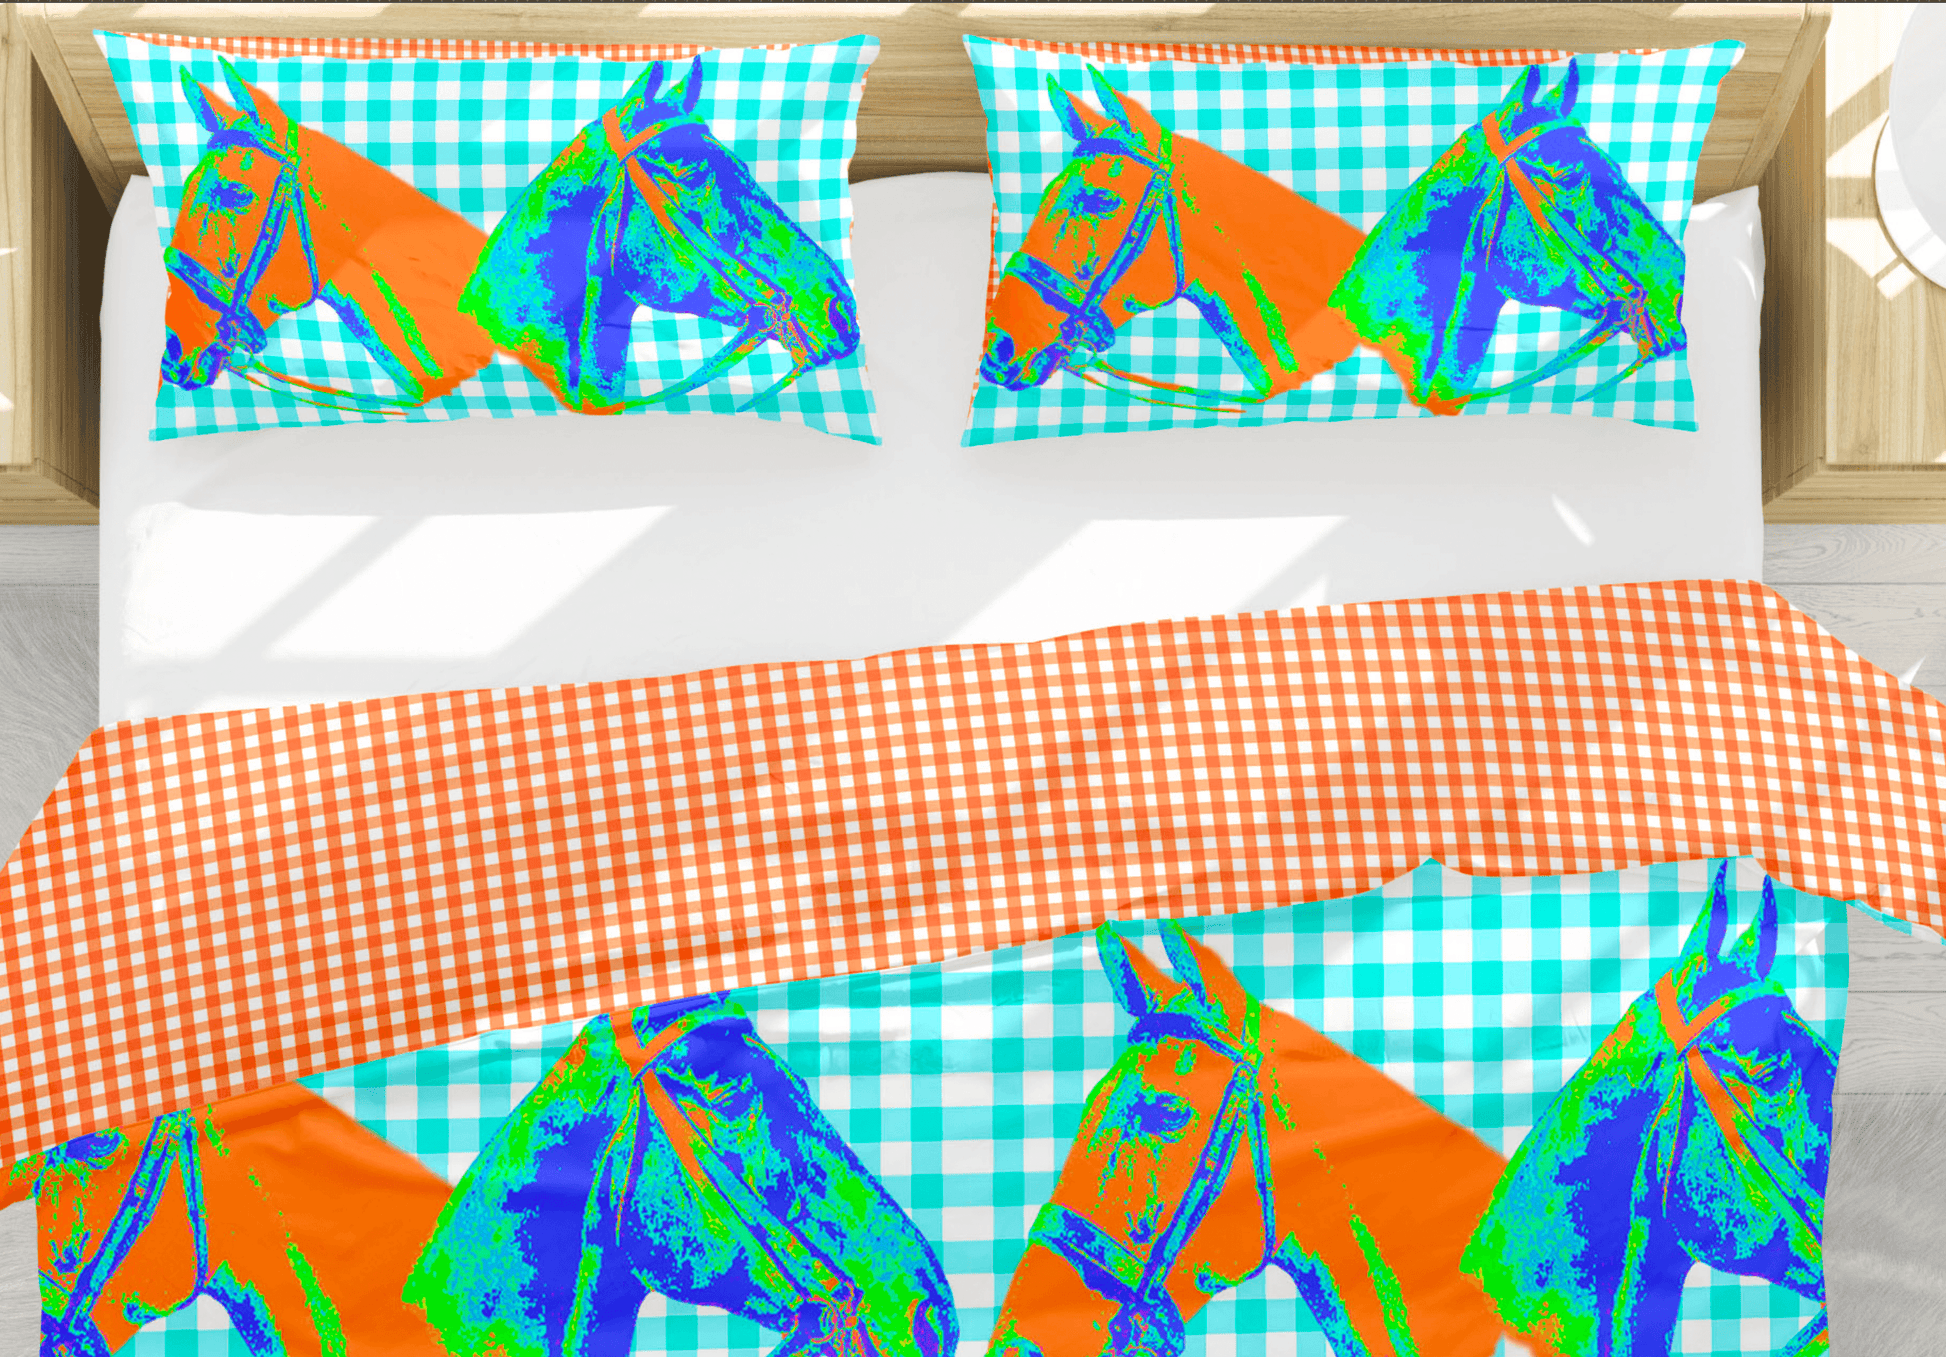 HORSE COUNTRY DUVET IN TURQUOISE - Middy N' Me